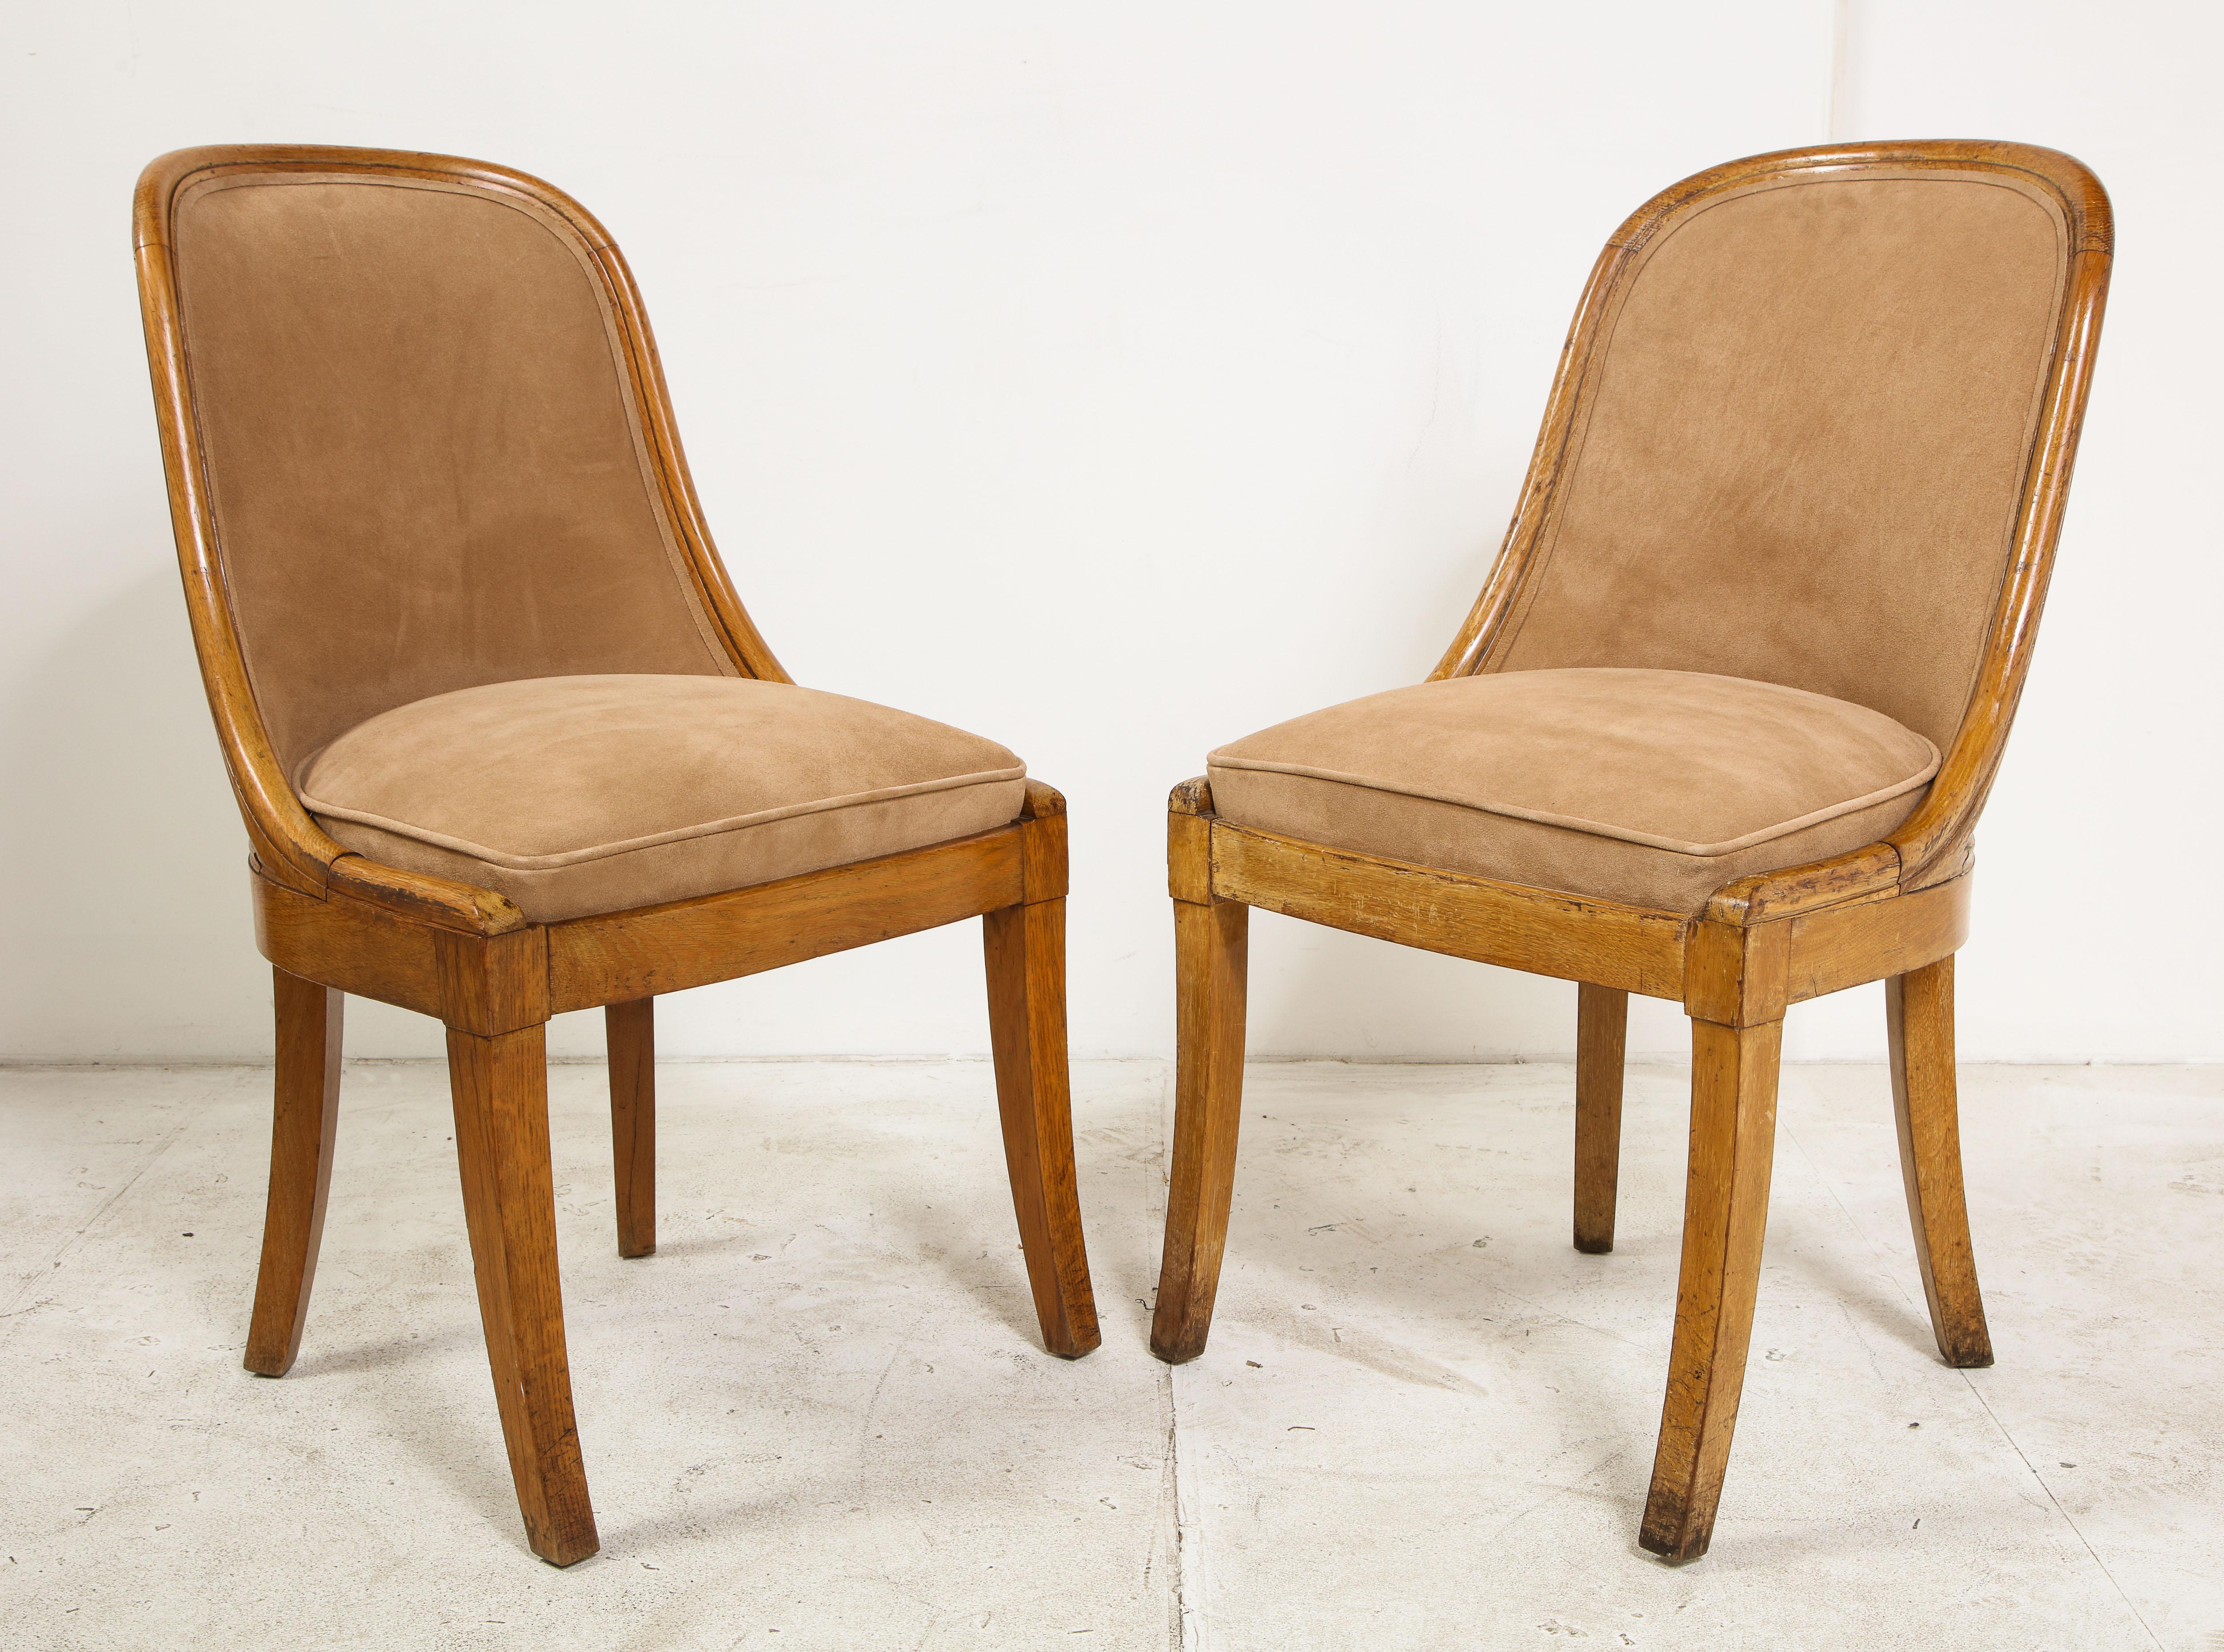 A pair of 1930s French oak side chairs, newly upholstered in tan suede.

           